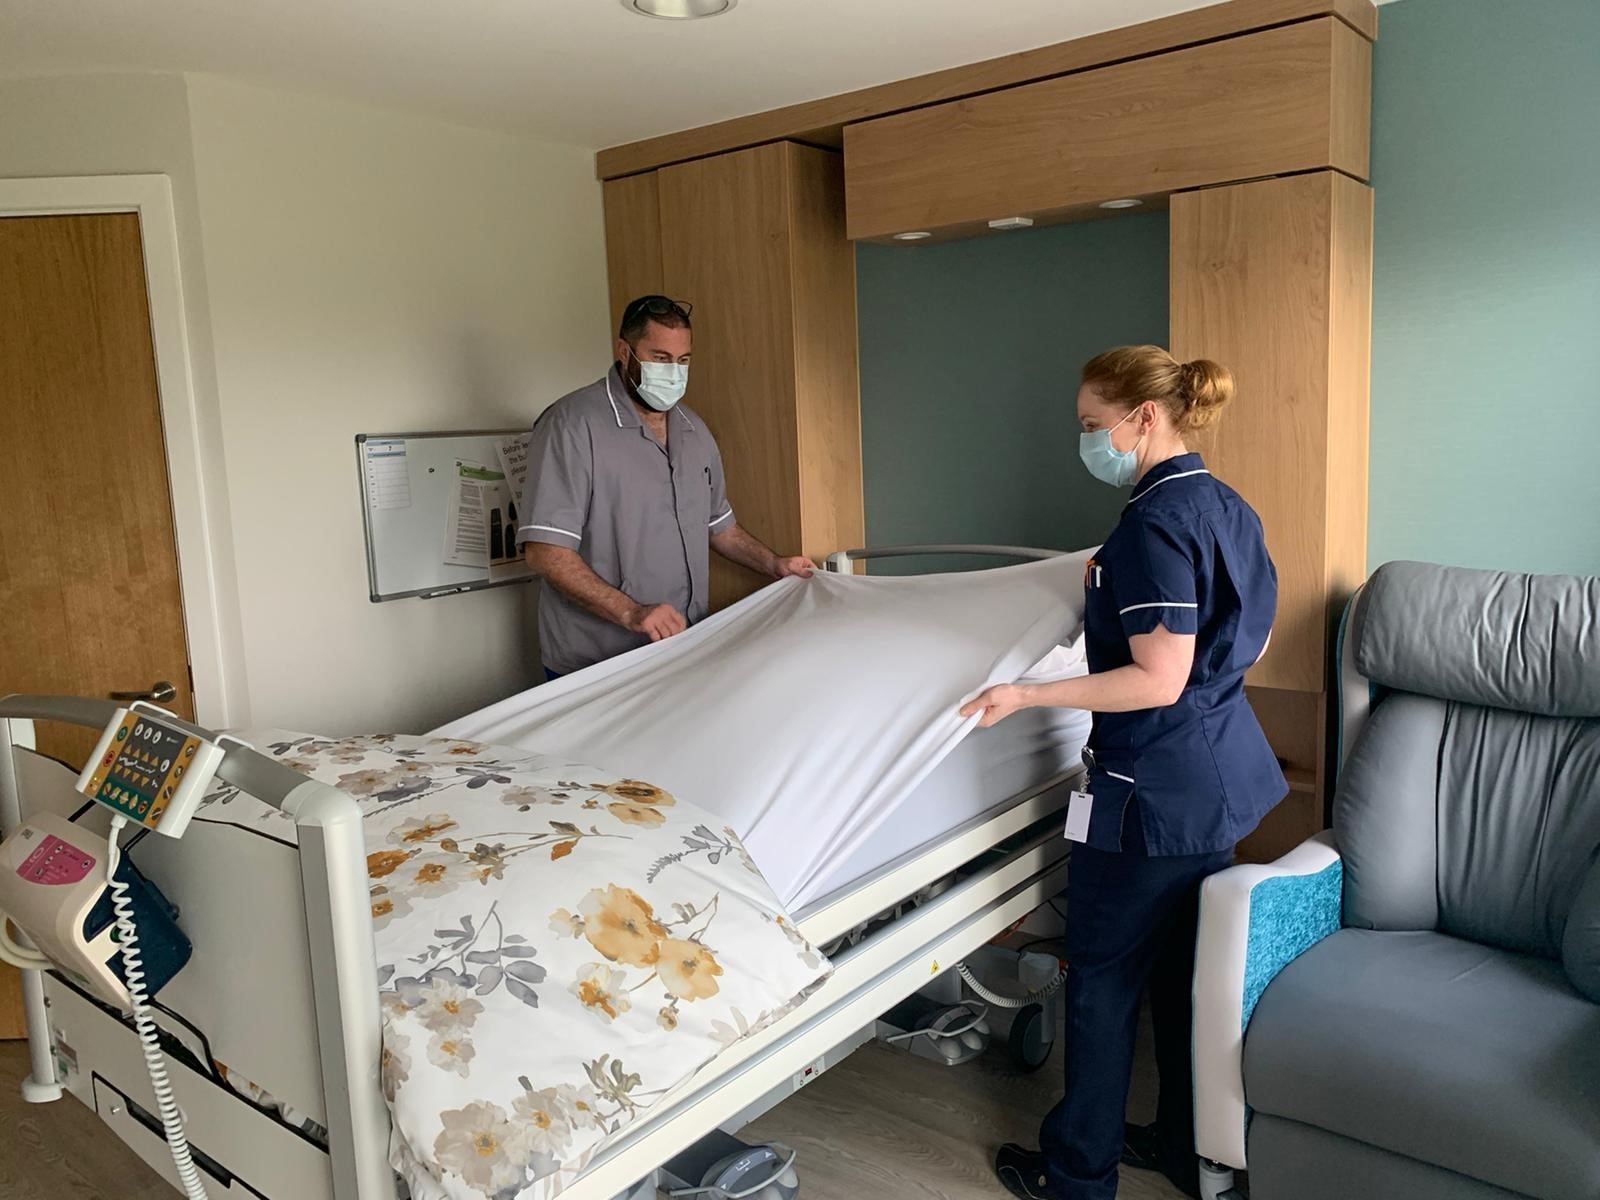 Barry Easton, Healthcare Support Worker, and Emma Parry-Jones, Ward Sister, making up a bed